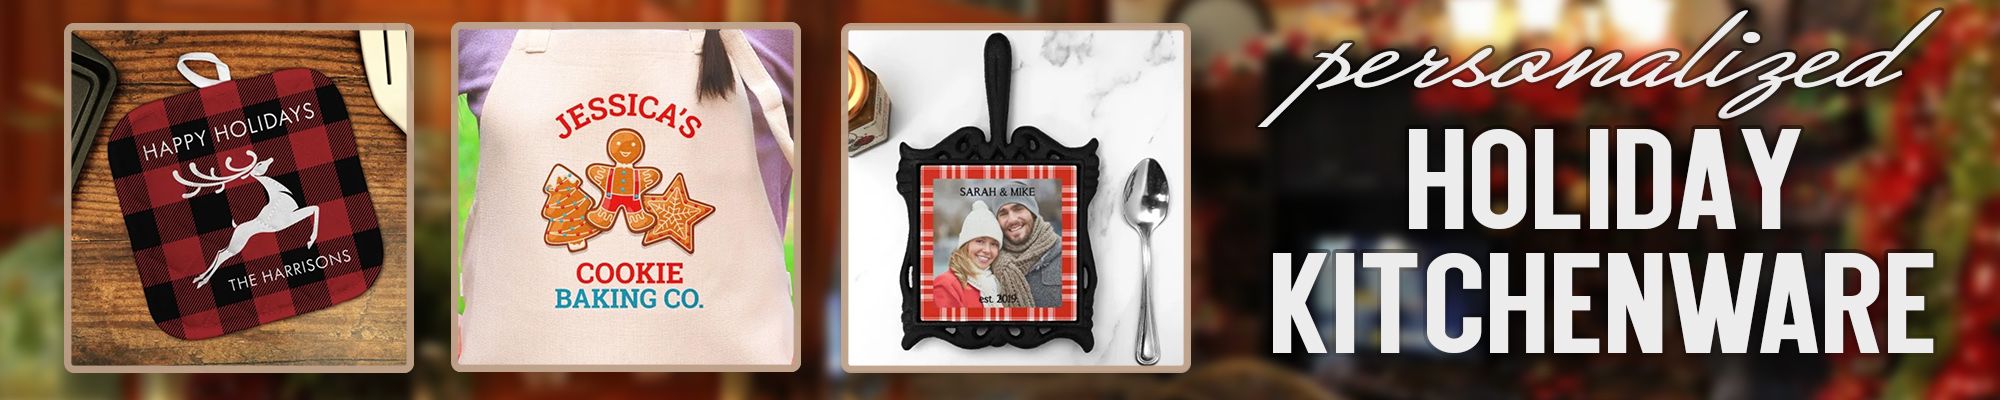 Personalized Holiday Kitchenware | Customized Gifts for the Home